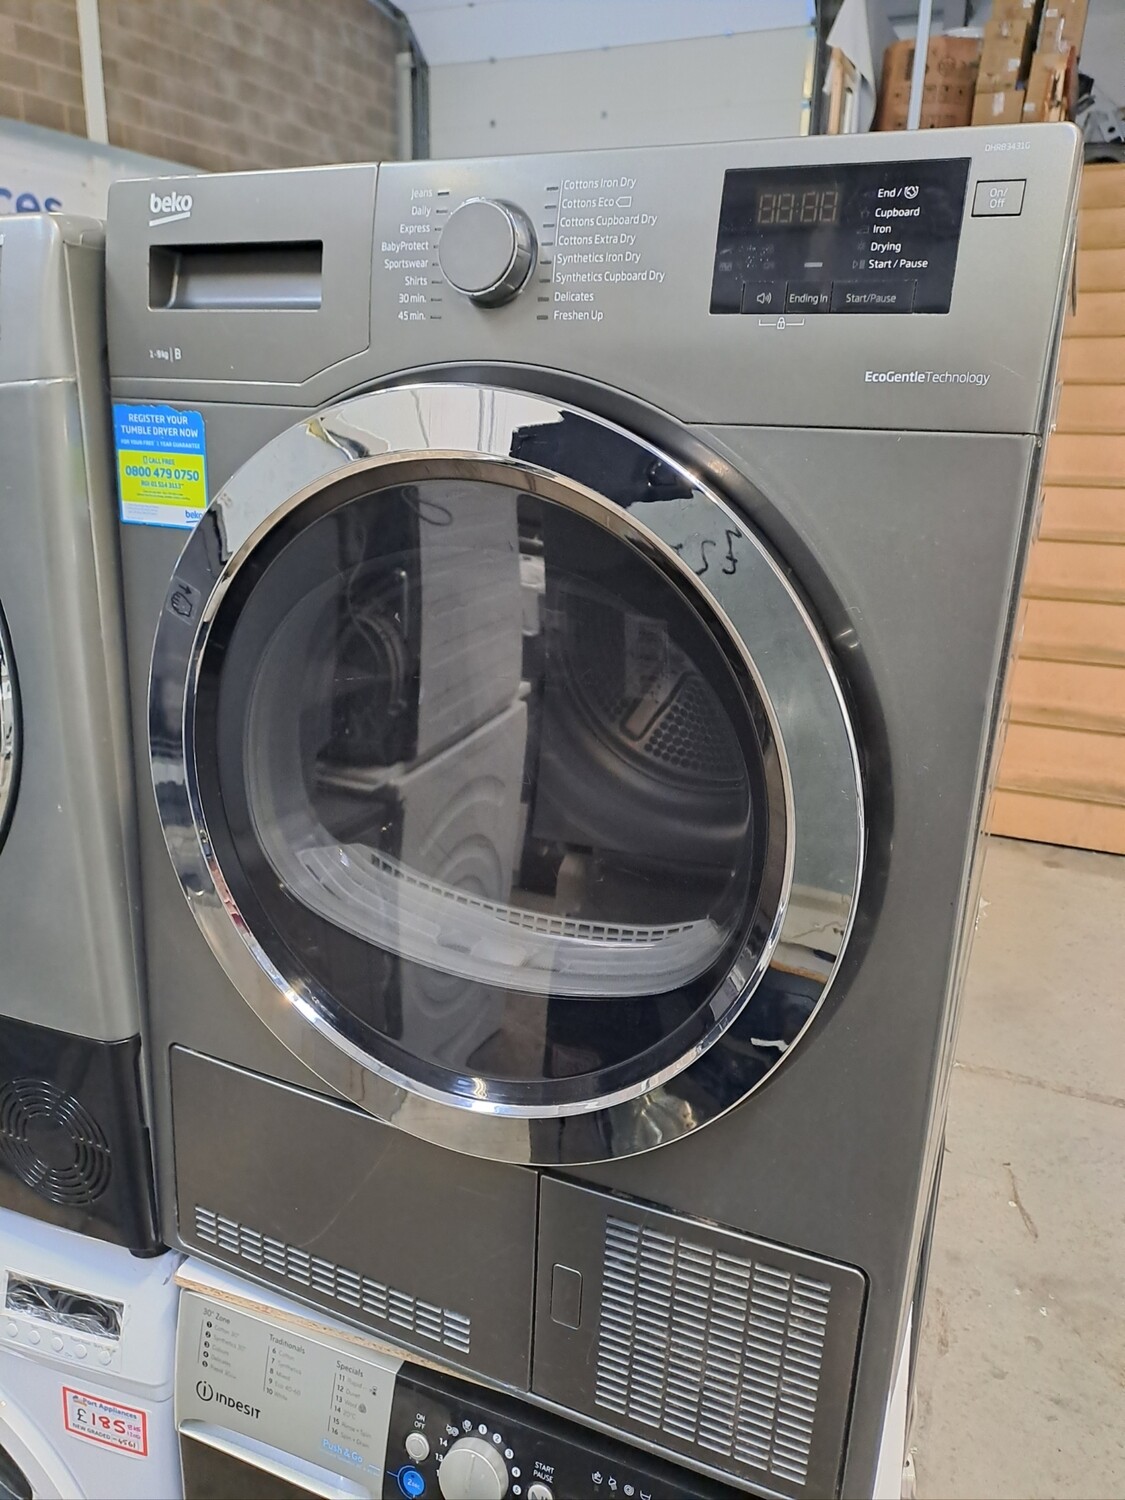 Beko DHR83431G 9Kg Condenser Dryer Grey Refurbished 6 Months Guarantee . This item is Located in our Whitby Road Shop